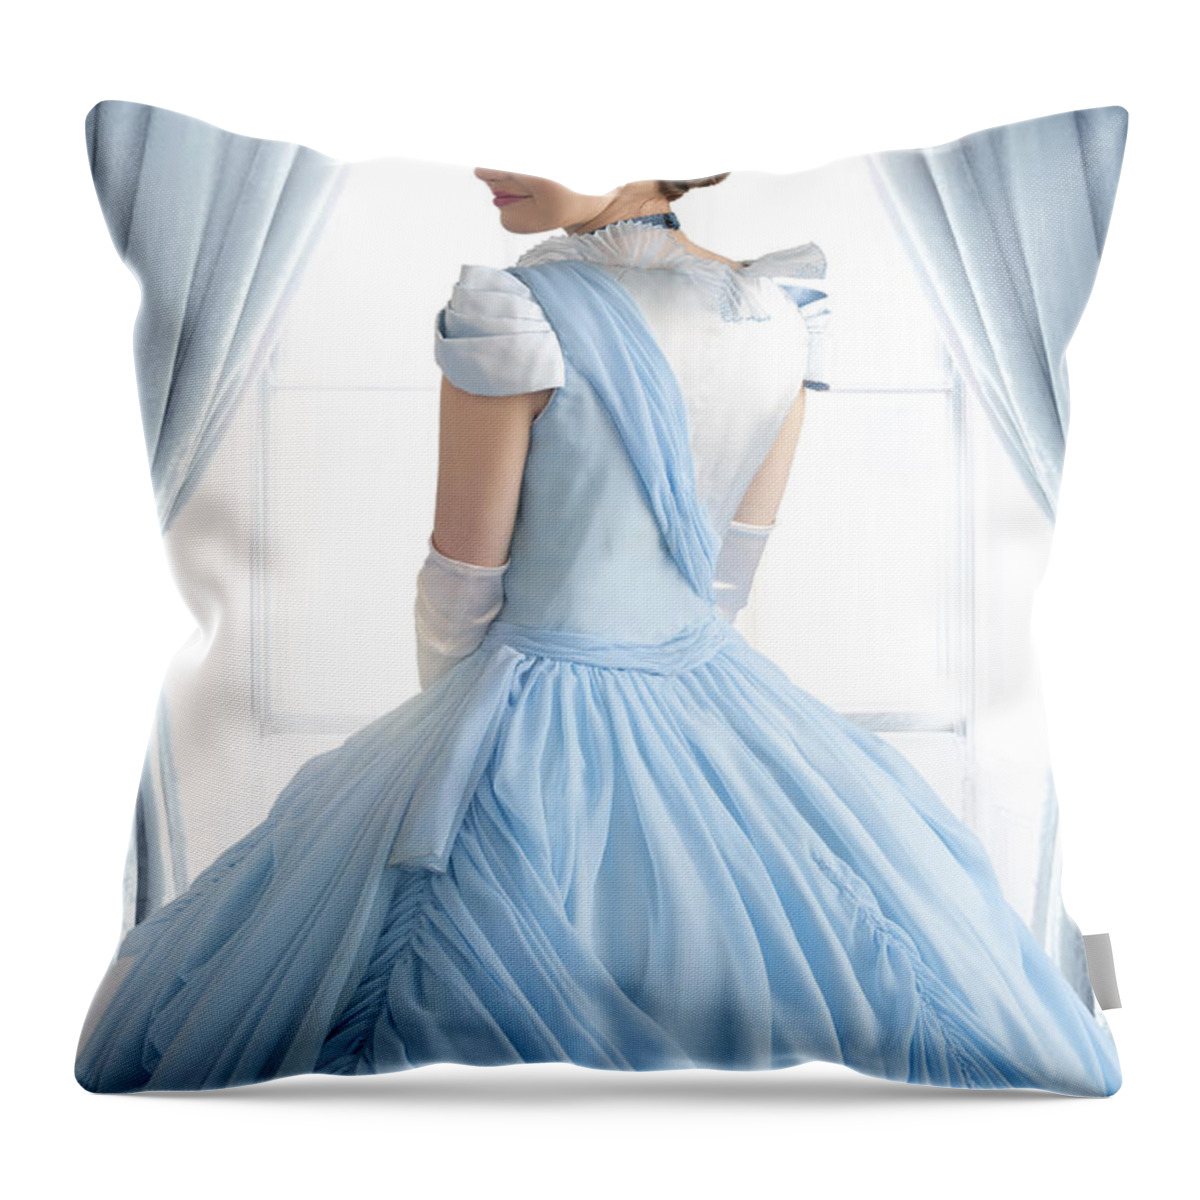 Victorian Throw Pillow featuring the photograph Beautiful Smiling Victorian Woman At The Window by Lee Avison